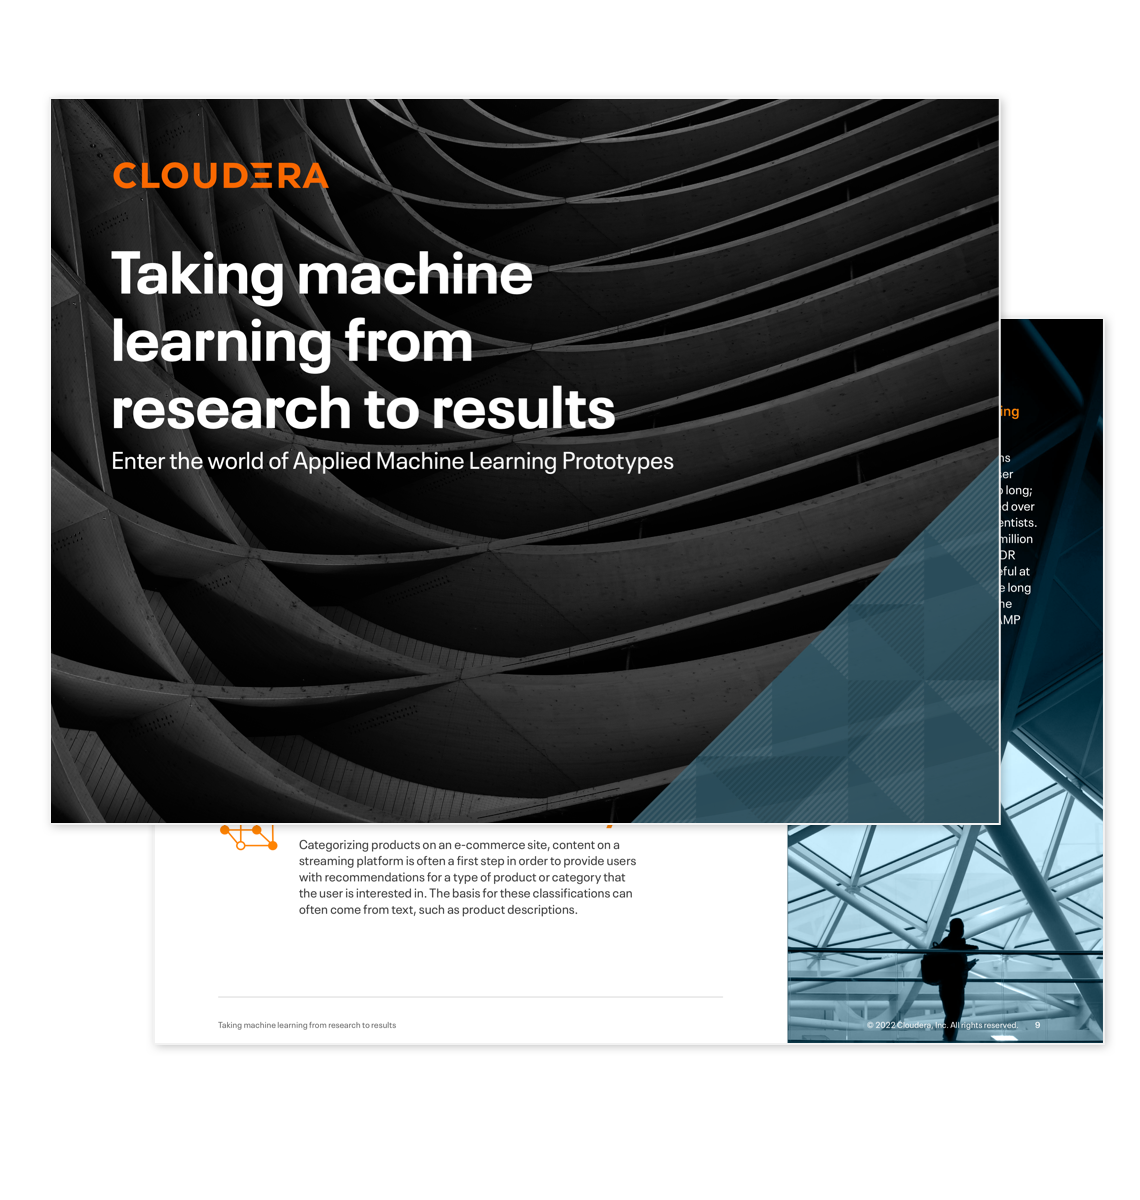 Taking machine learning from research to results